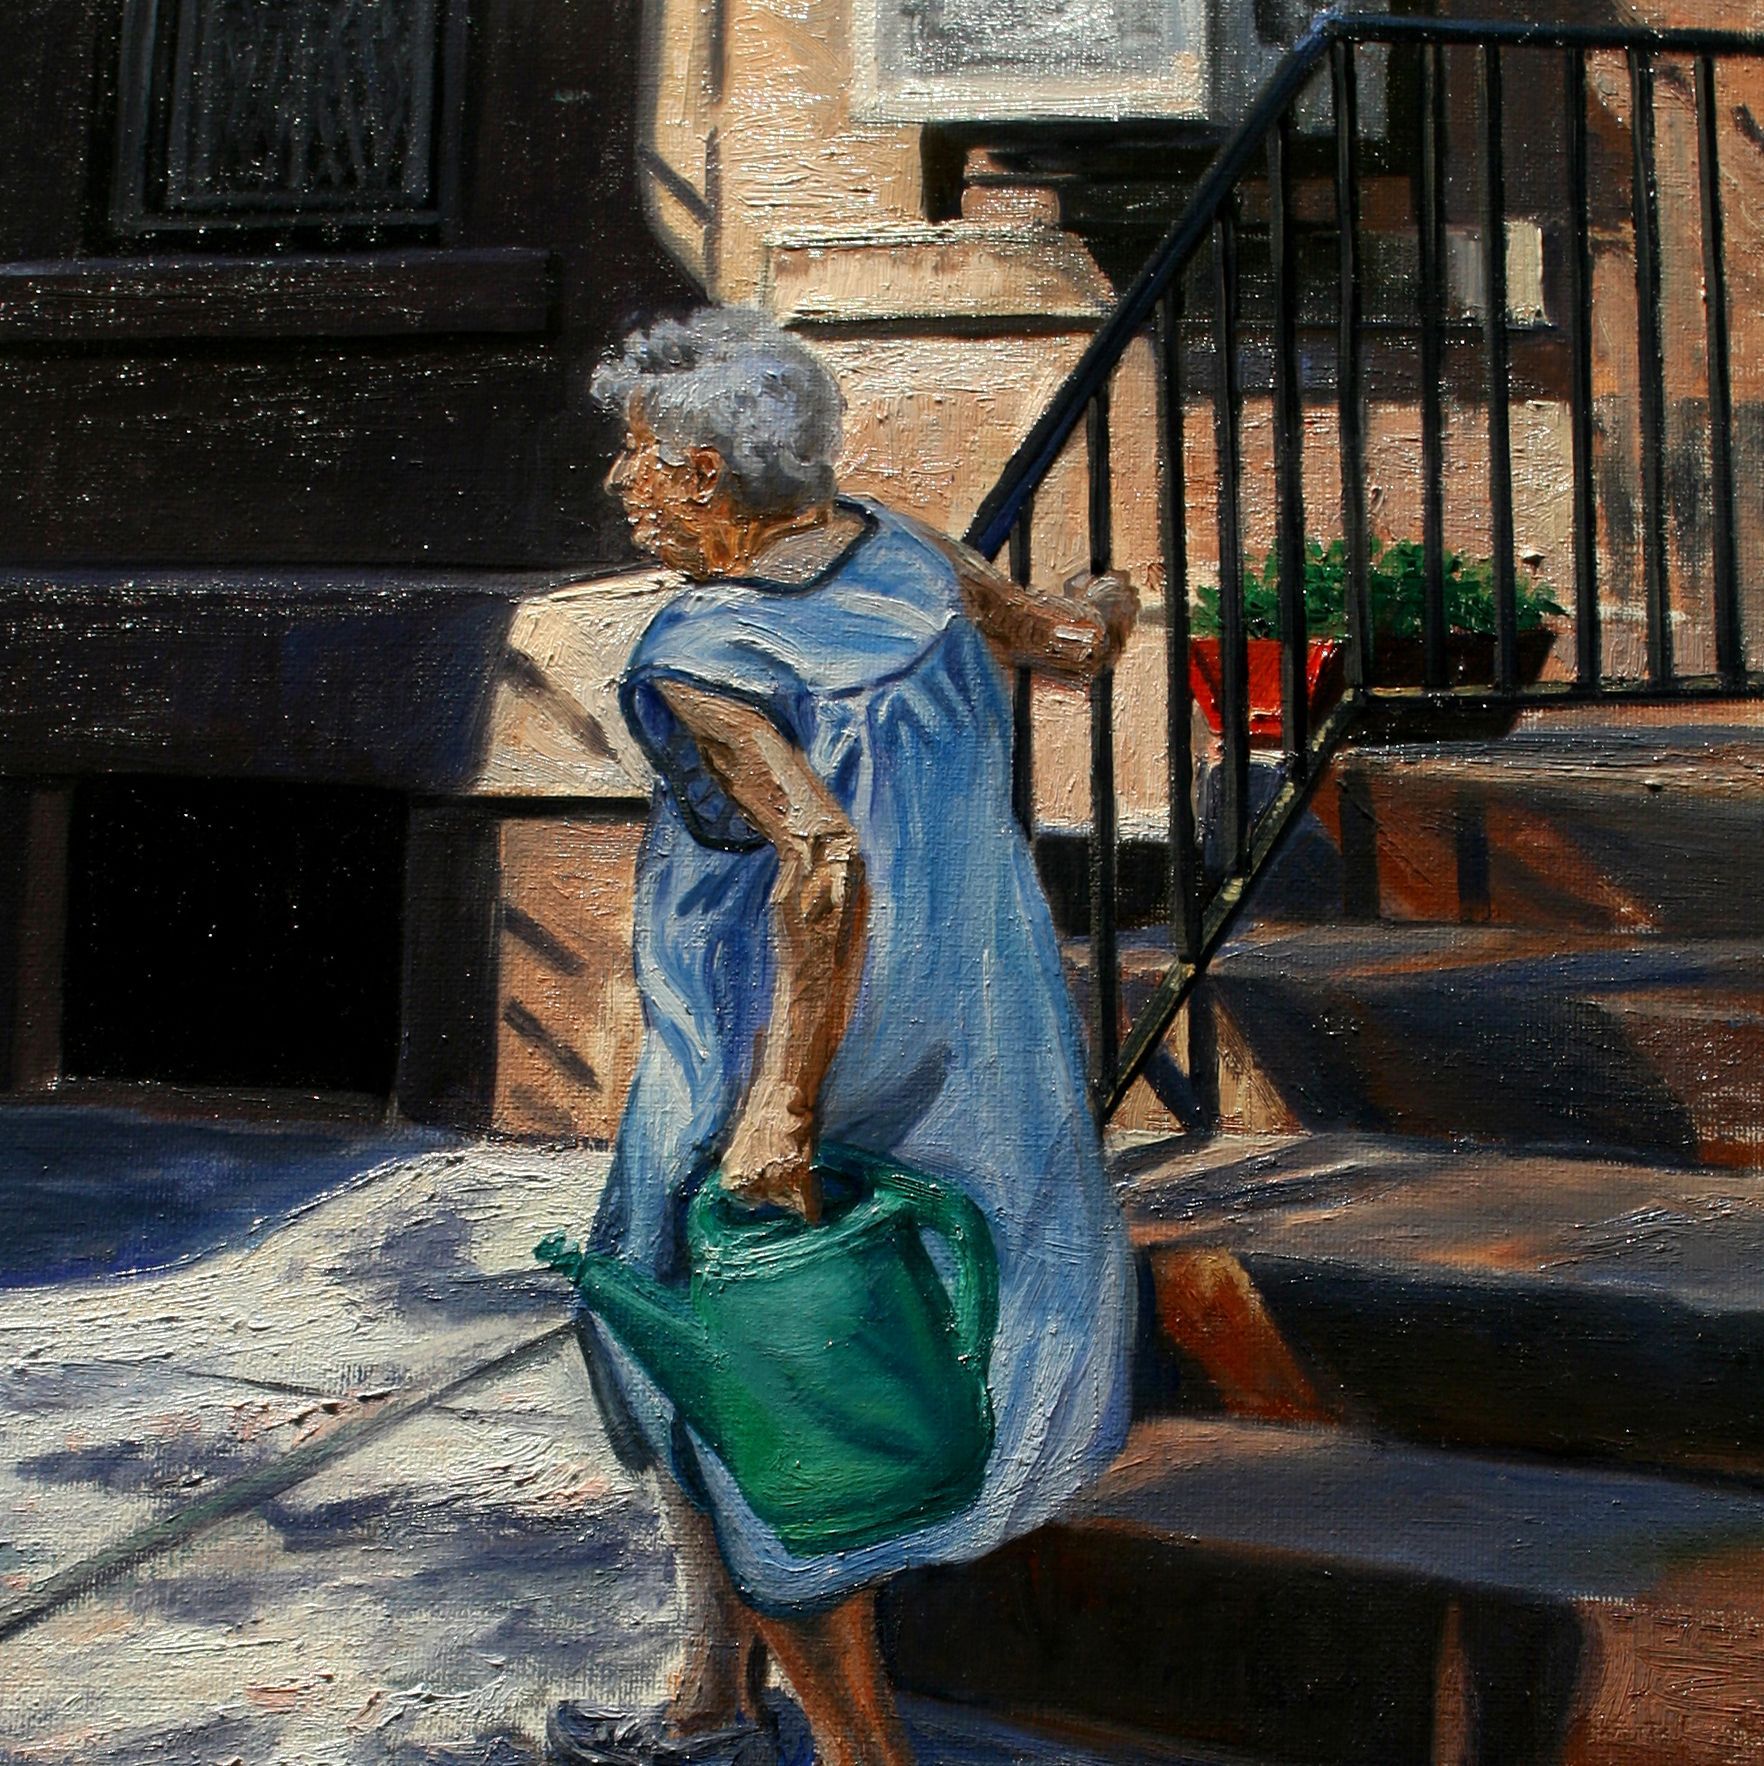 Watering | Figurative Oil Painting by John Varriano